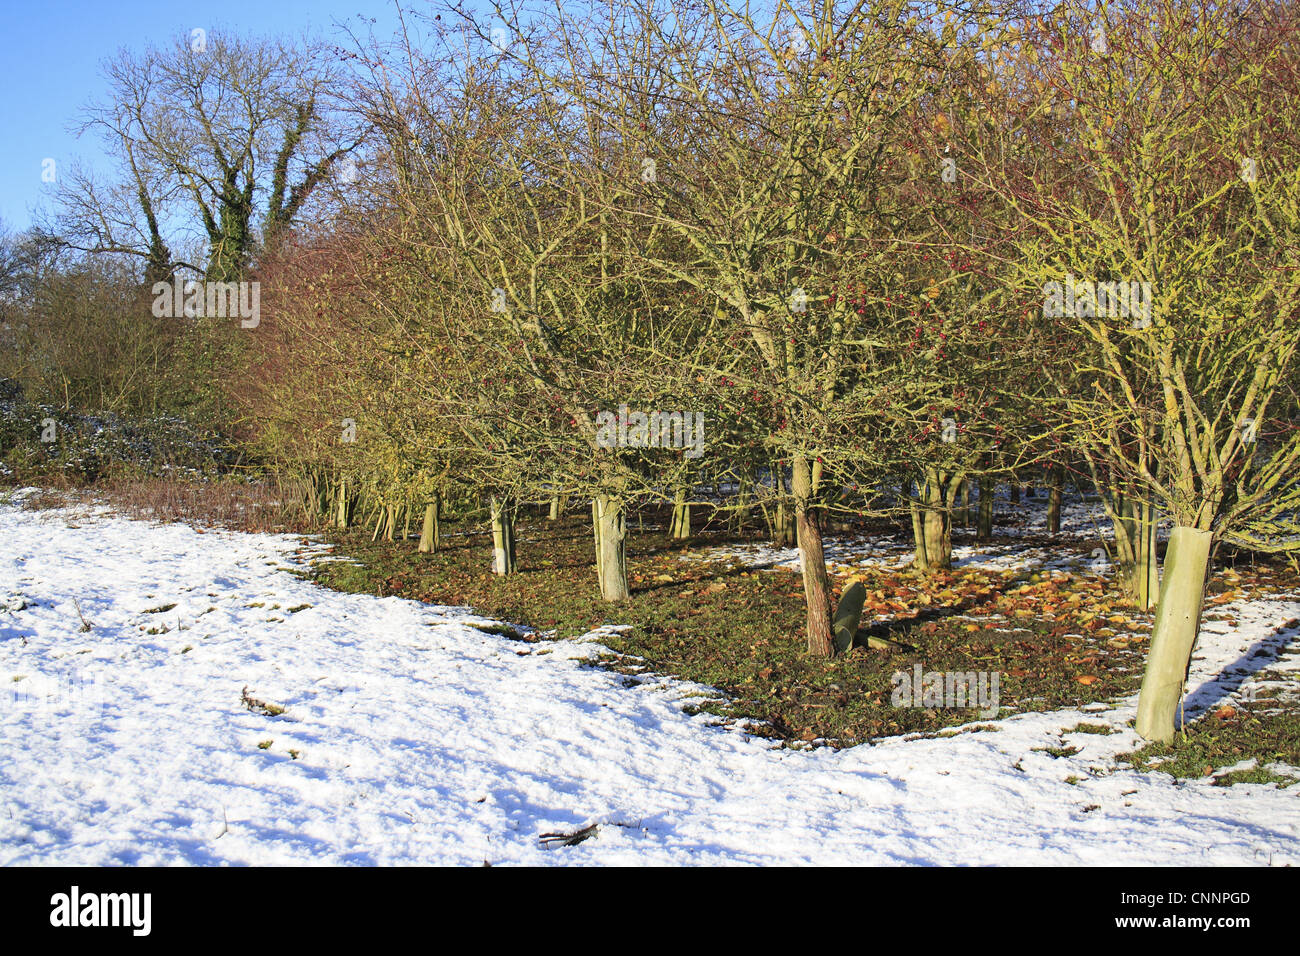 New woodland in snow, young trees protected with plastic sleeves, Bacton, Suffolk, England, november Stock Photo